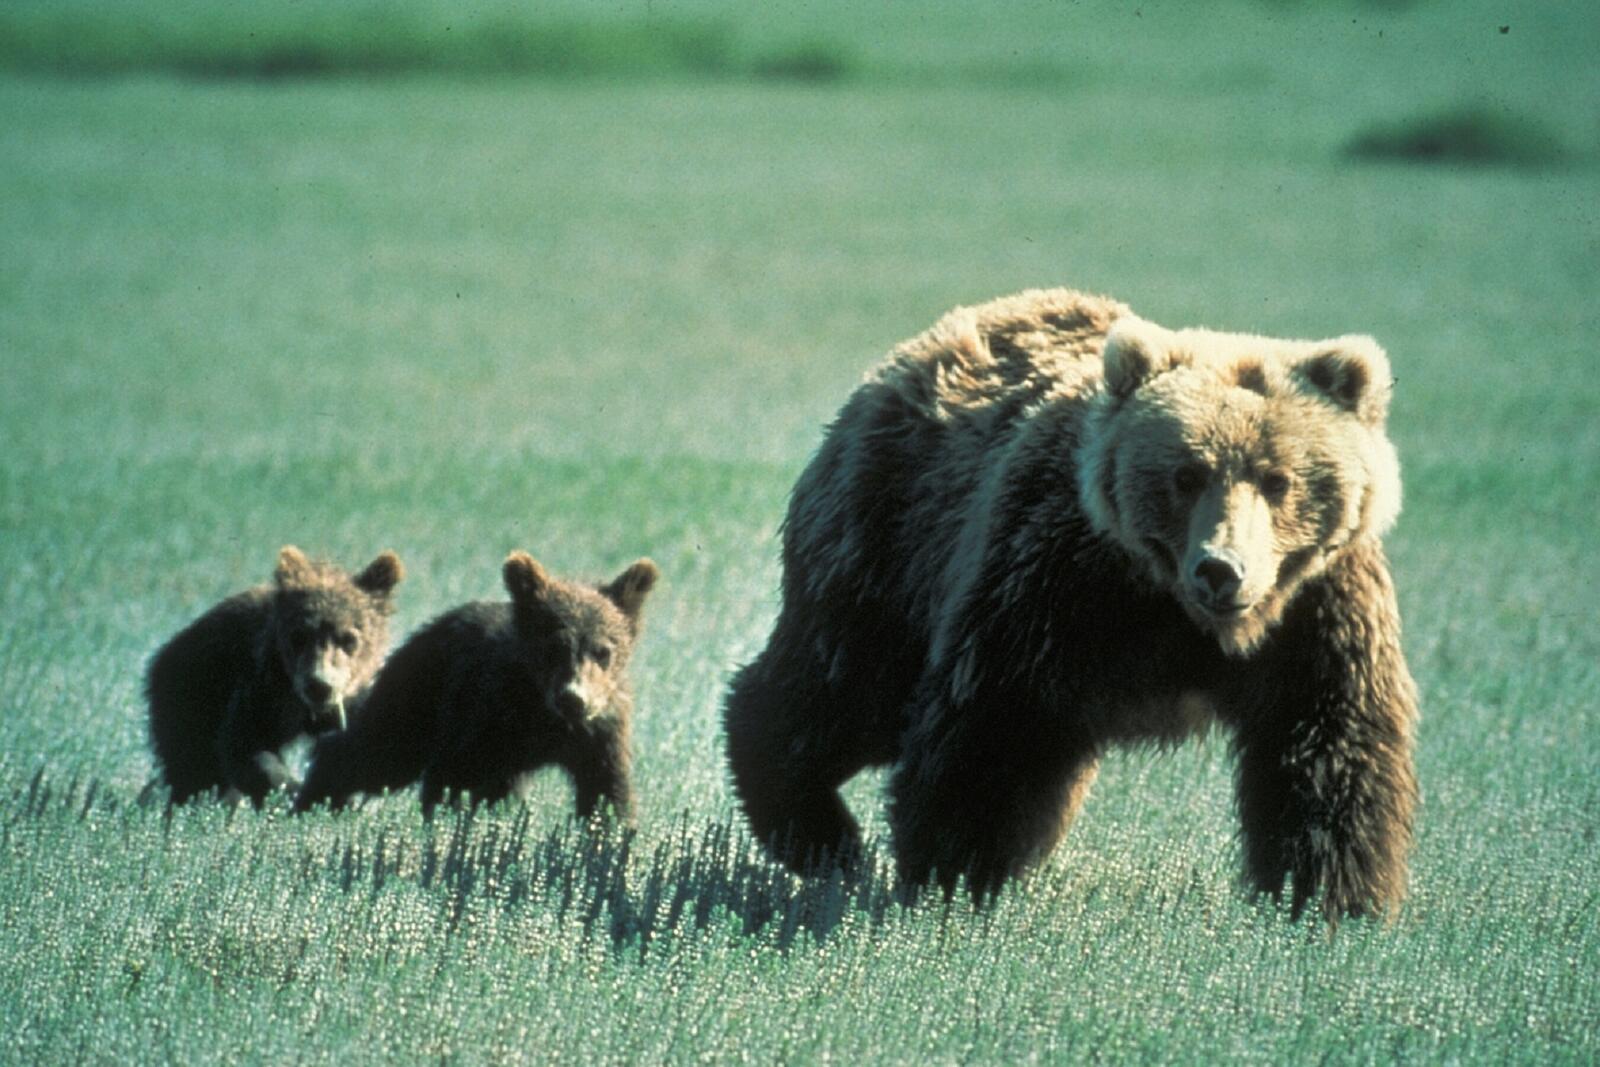 Free photo A mama bear and her two cubs are walking through a green field